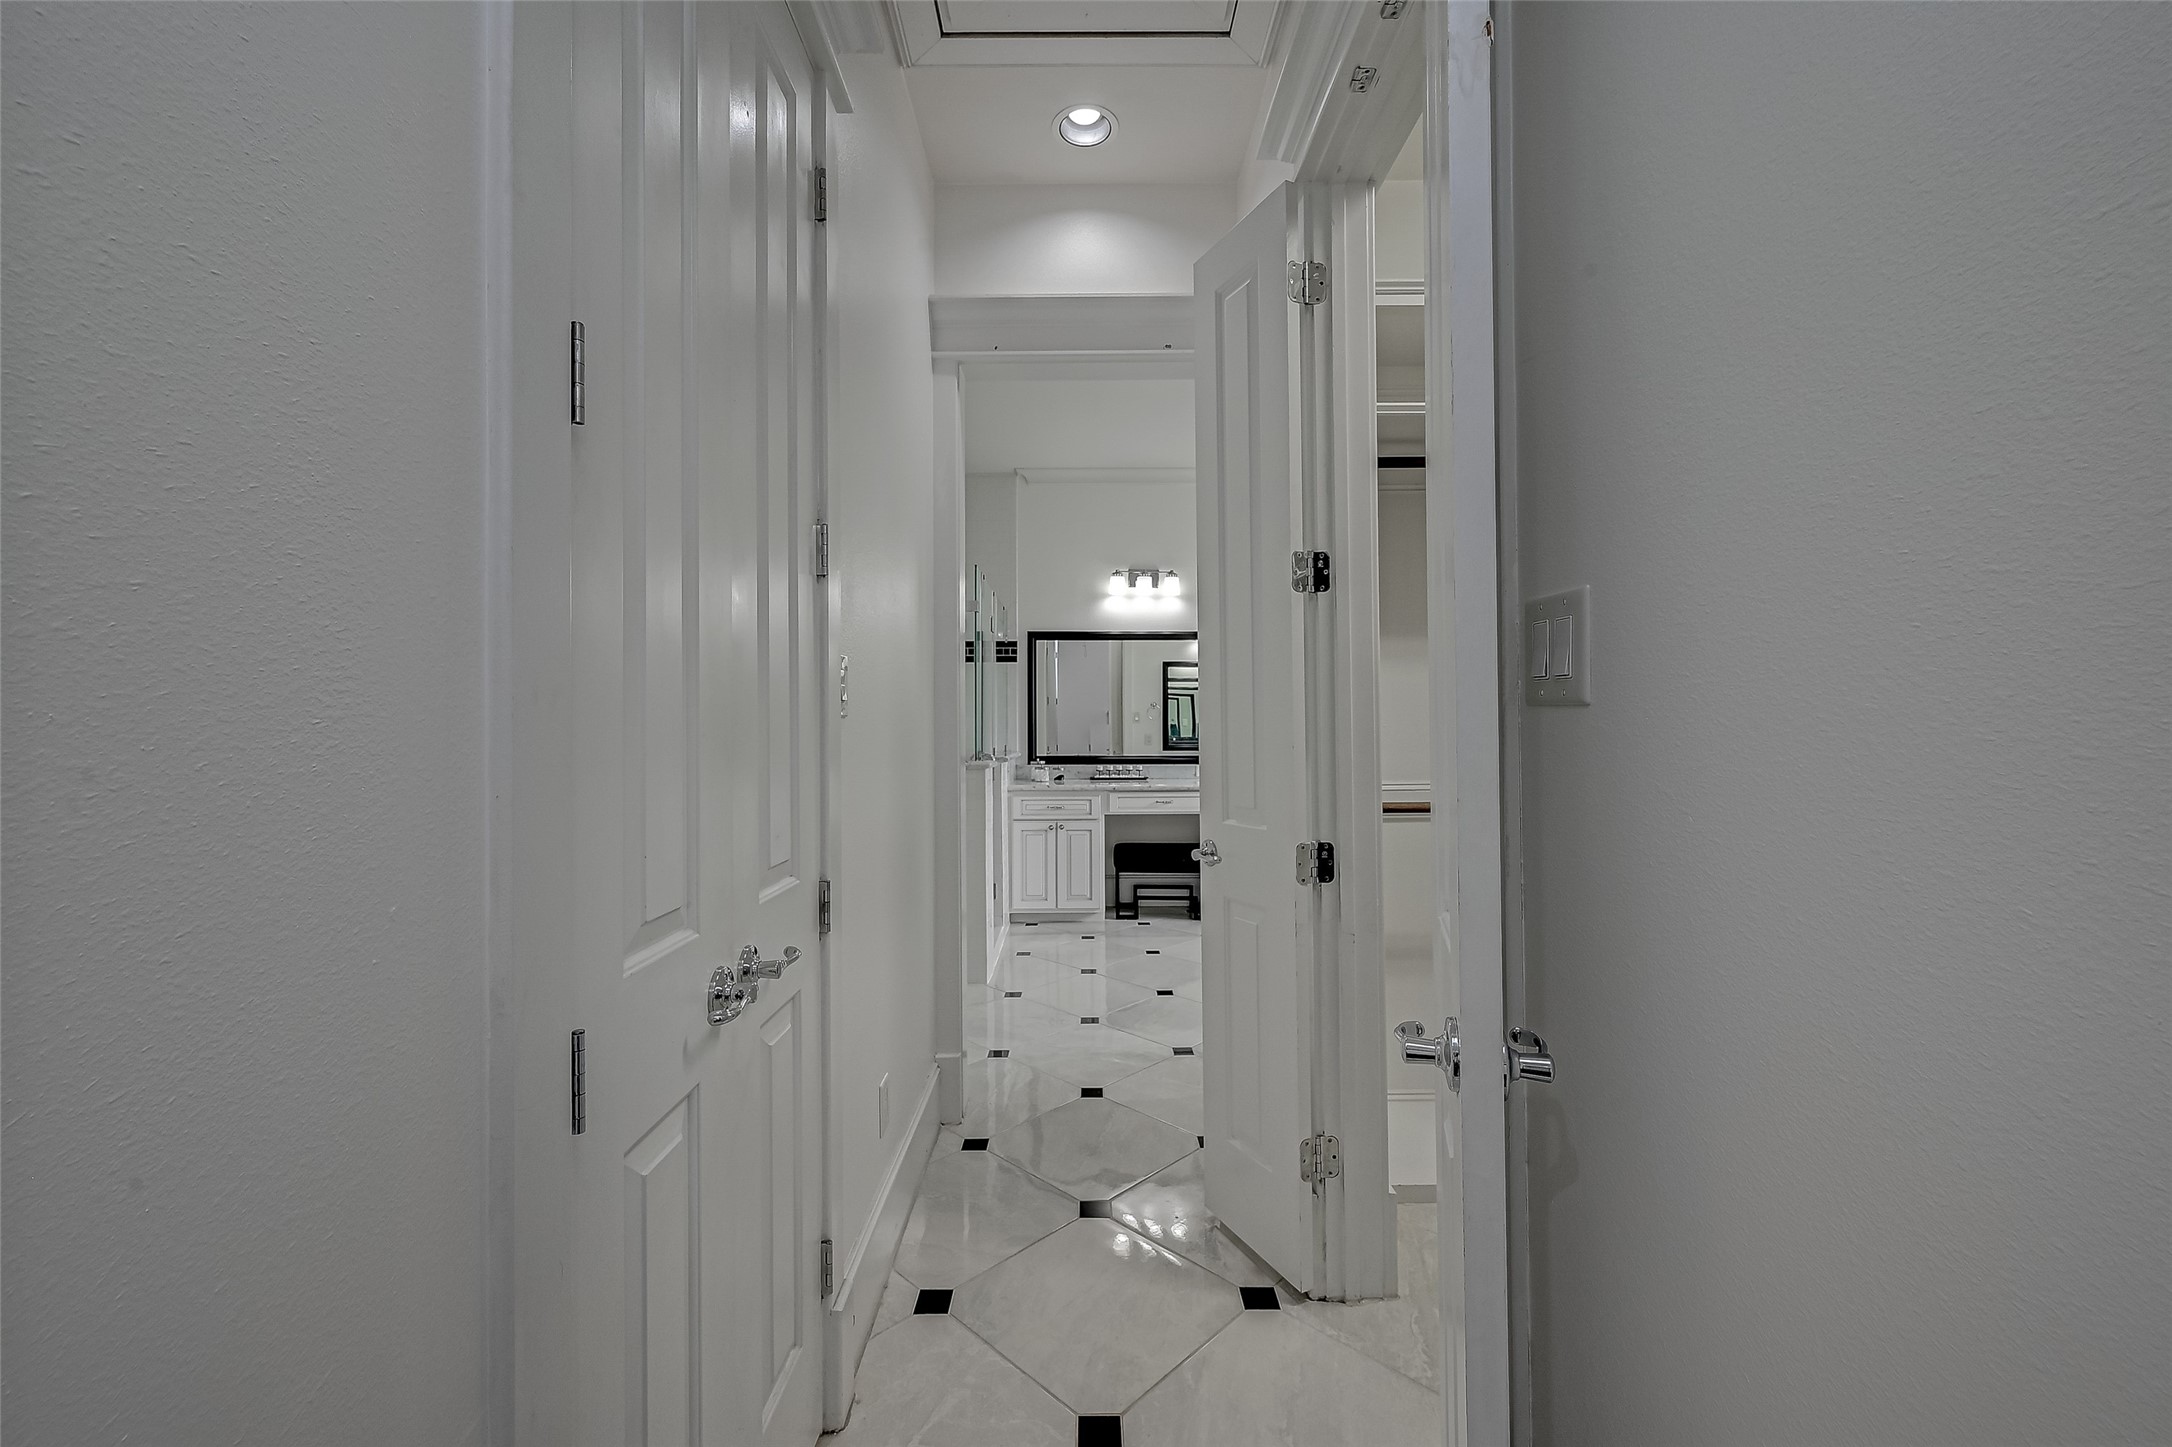 The hallway gracefully guides the way towards the spa-like bathroom, flanked by dual closets on each side, seamlessly blending practicality and aesthetics.